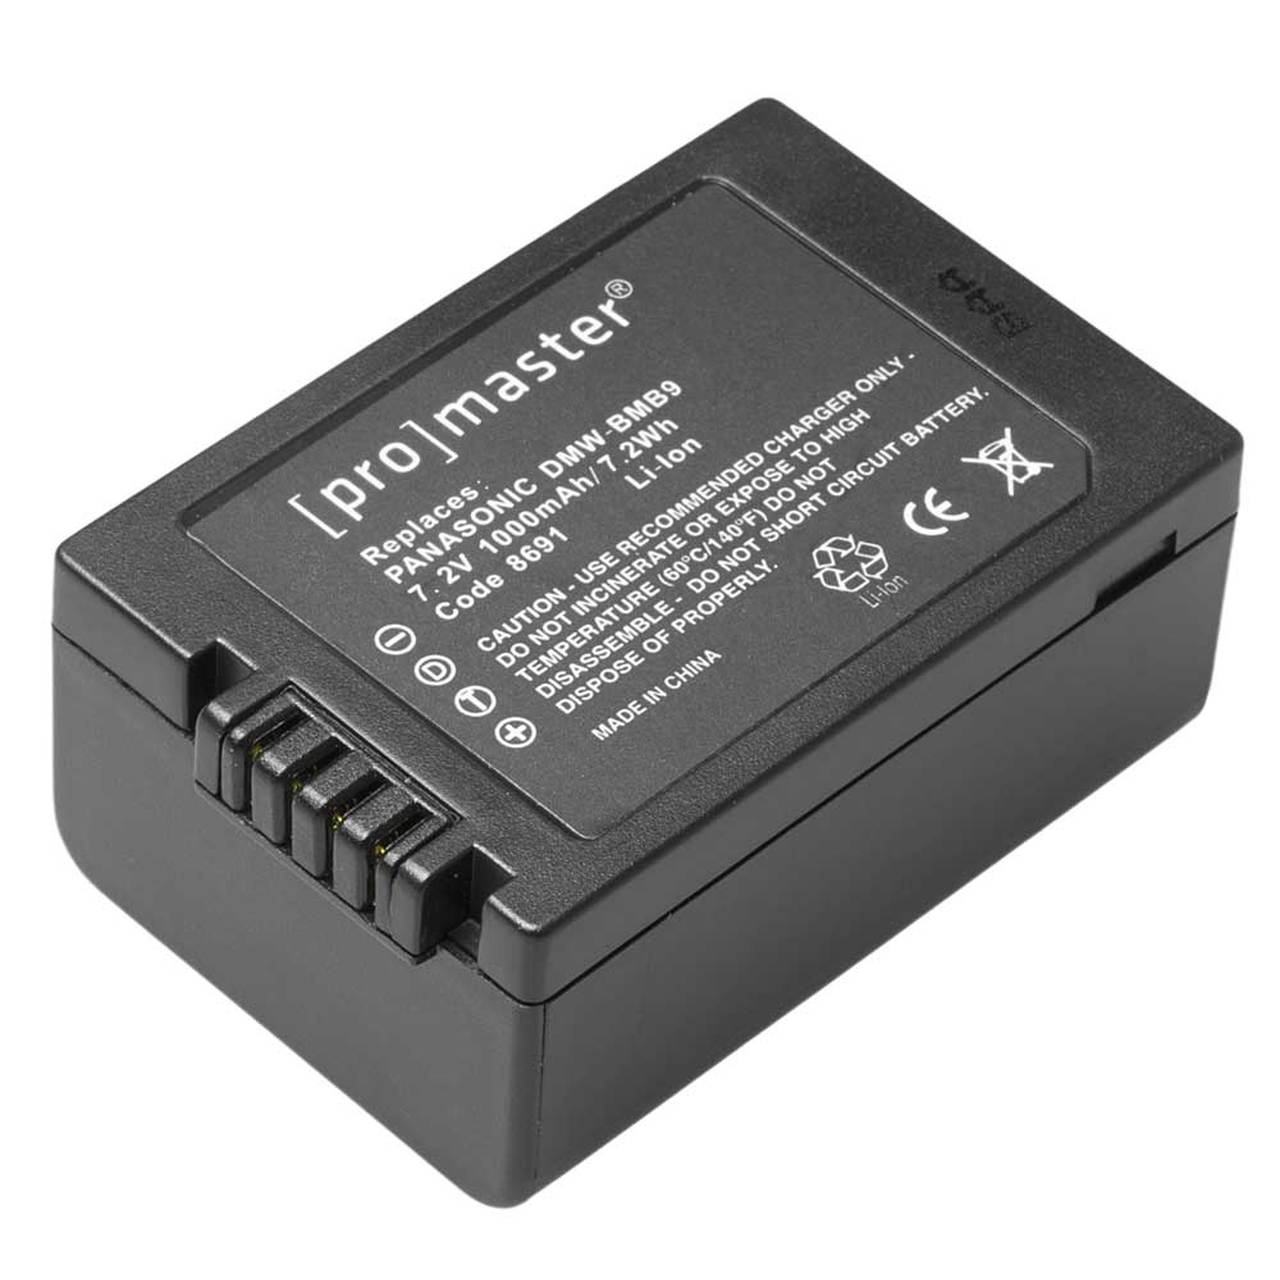 Promaster 8691 DMW-BMB9 Battery for  Panasonic FZ100 and FZ40